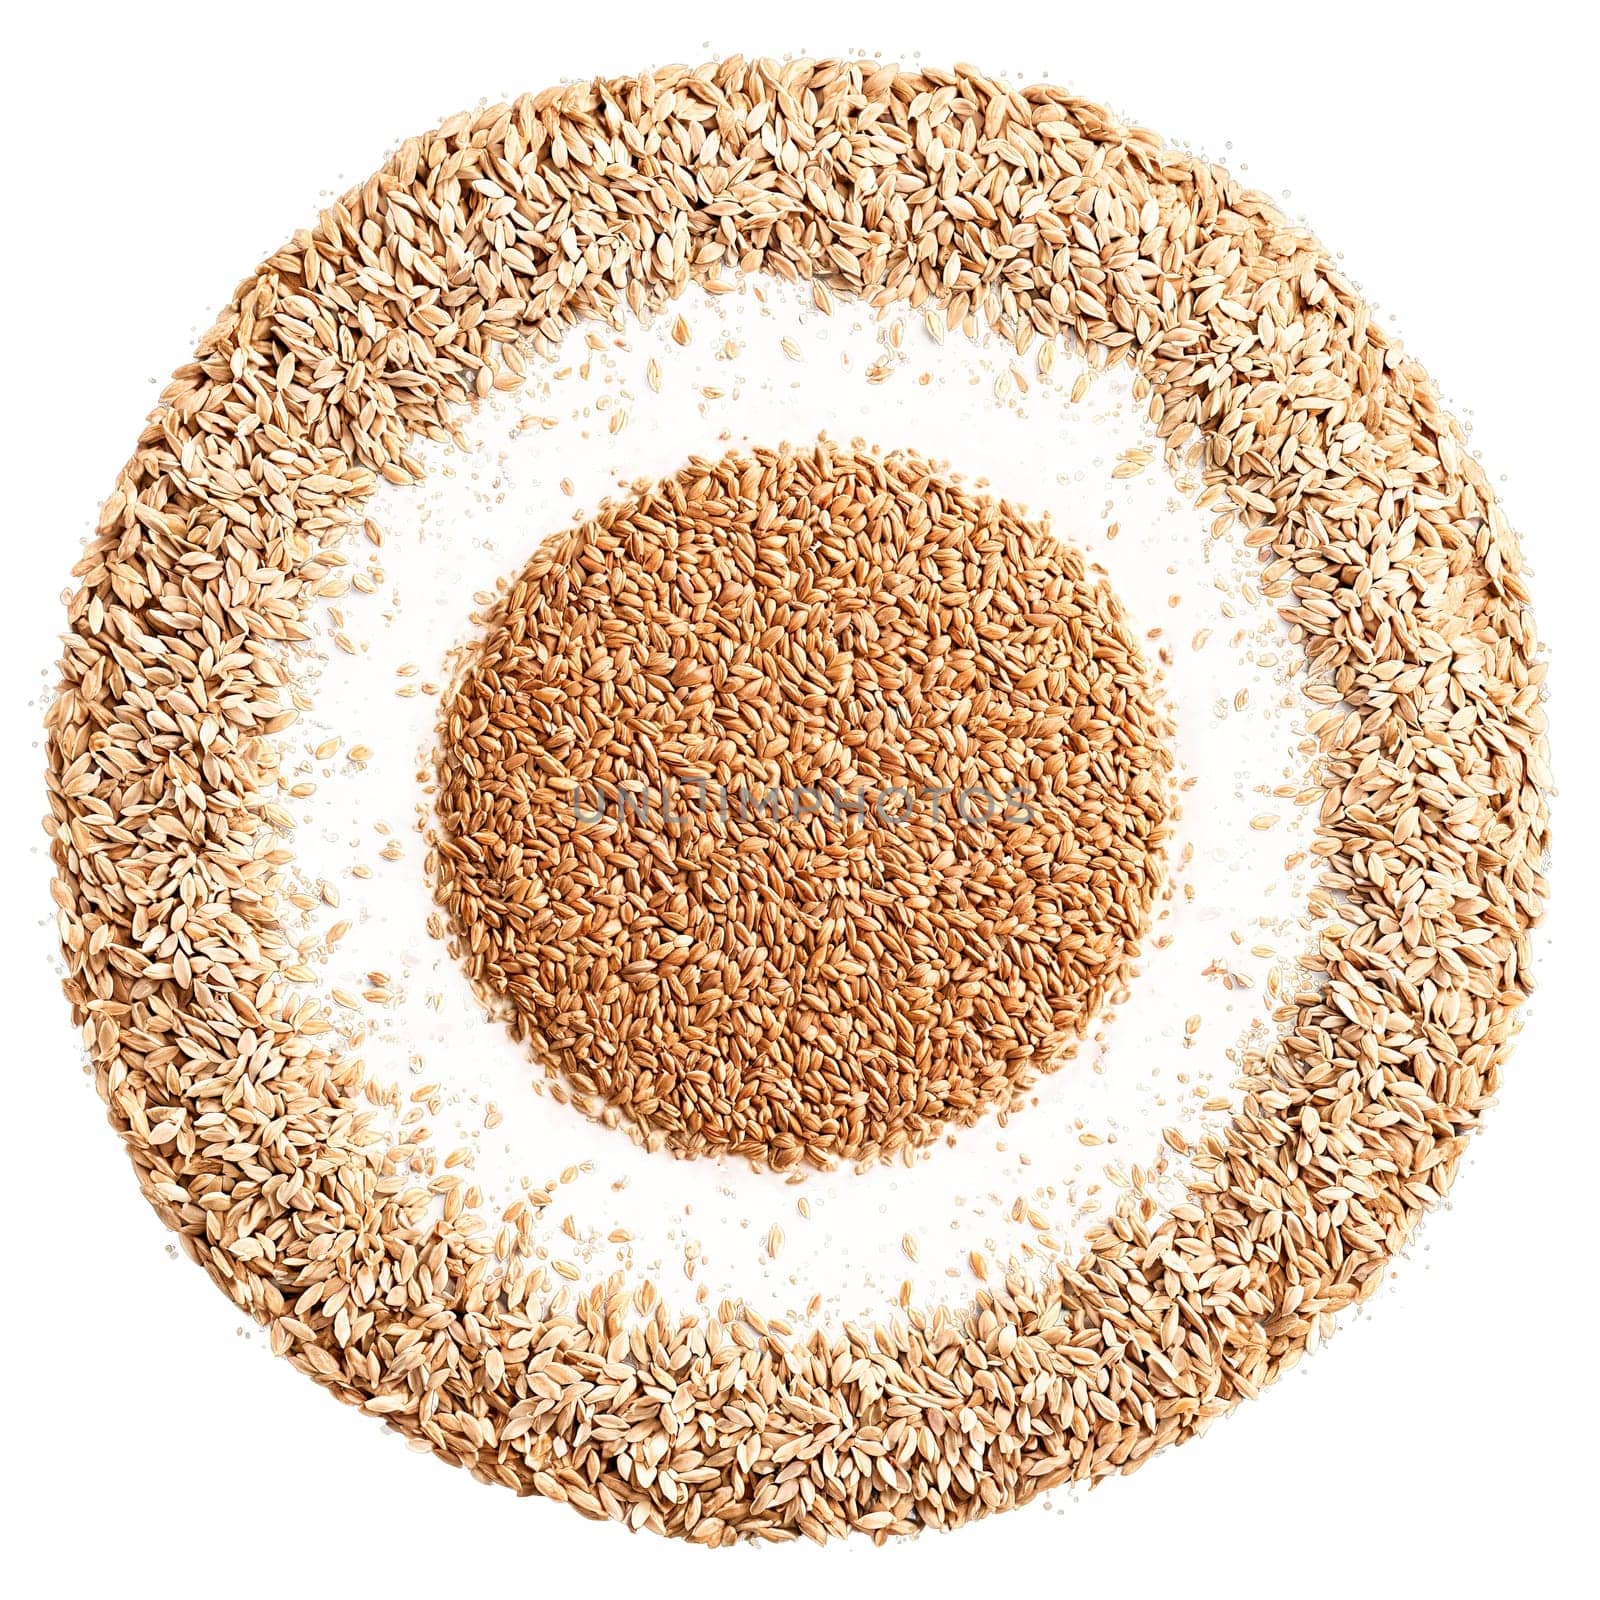 Rye mandala a circular design of whole rye rye flakes and rye flour with grains by panophotograph